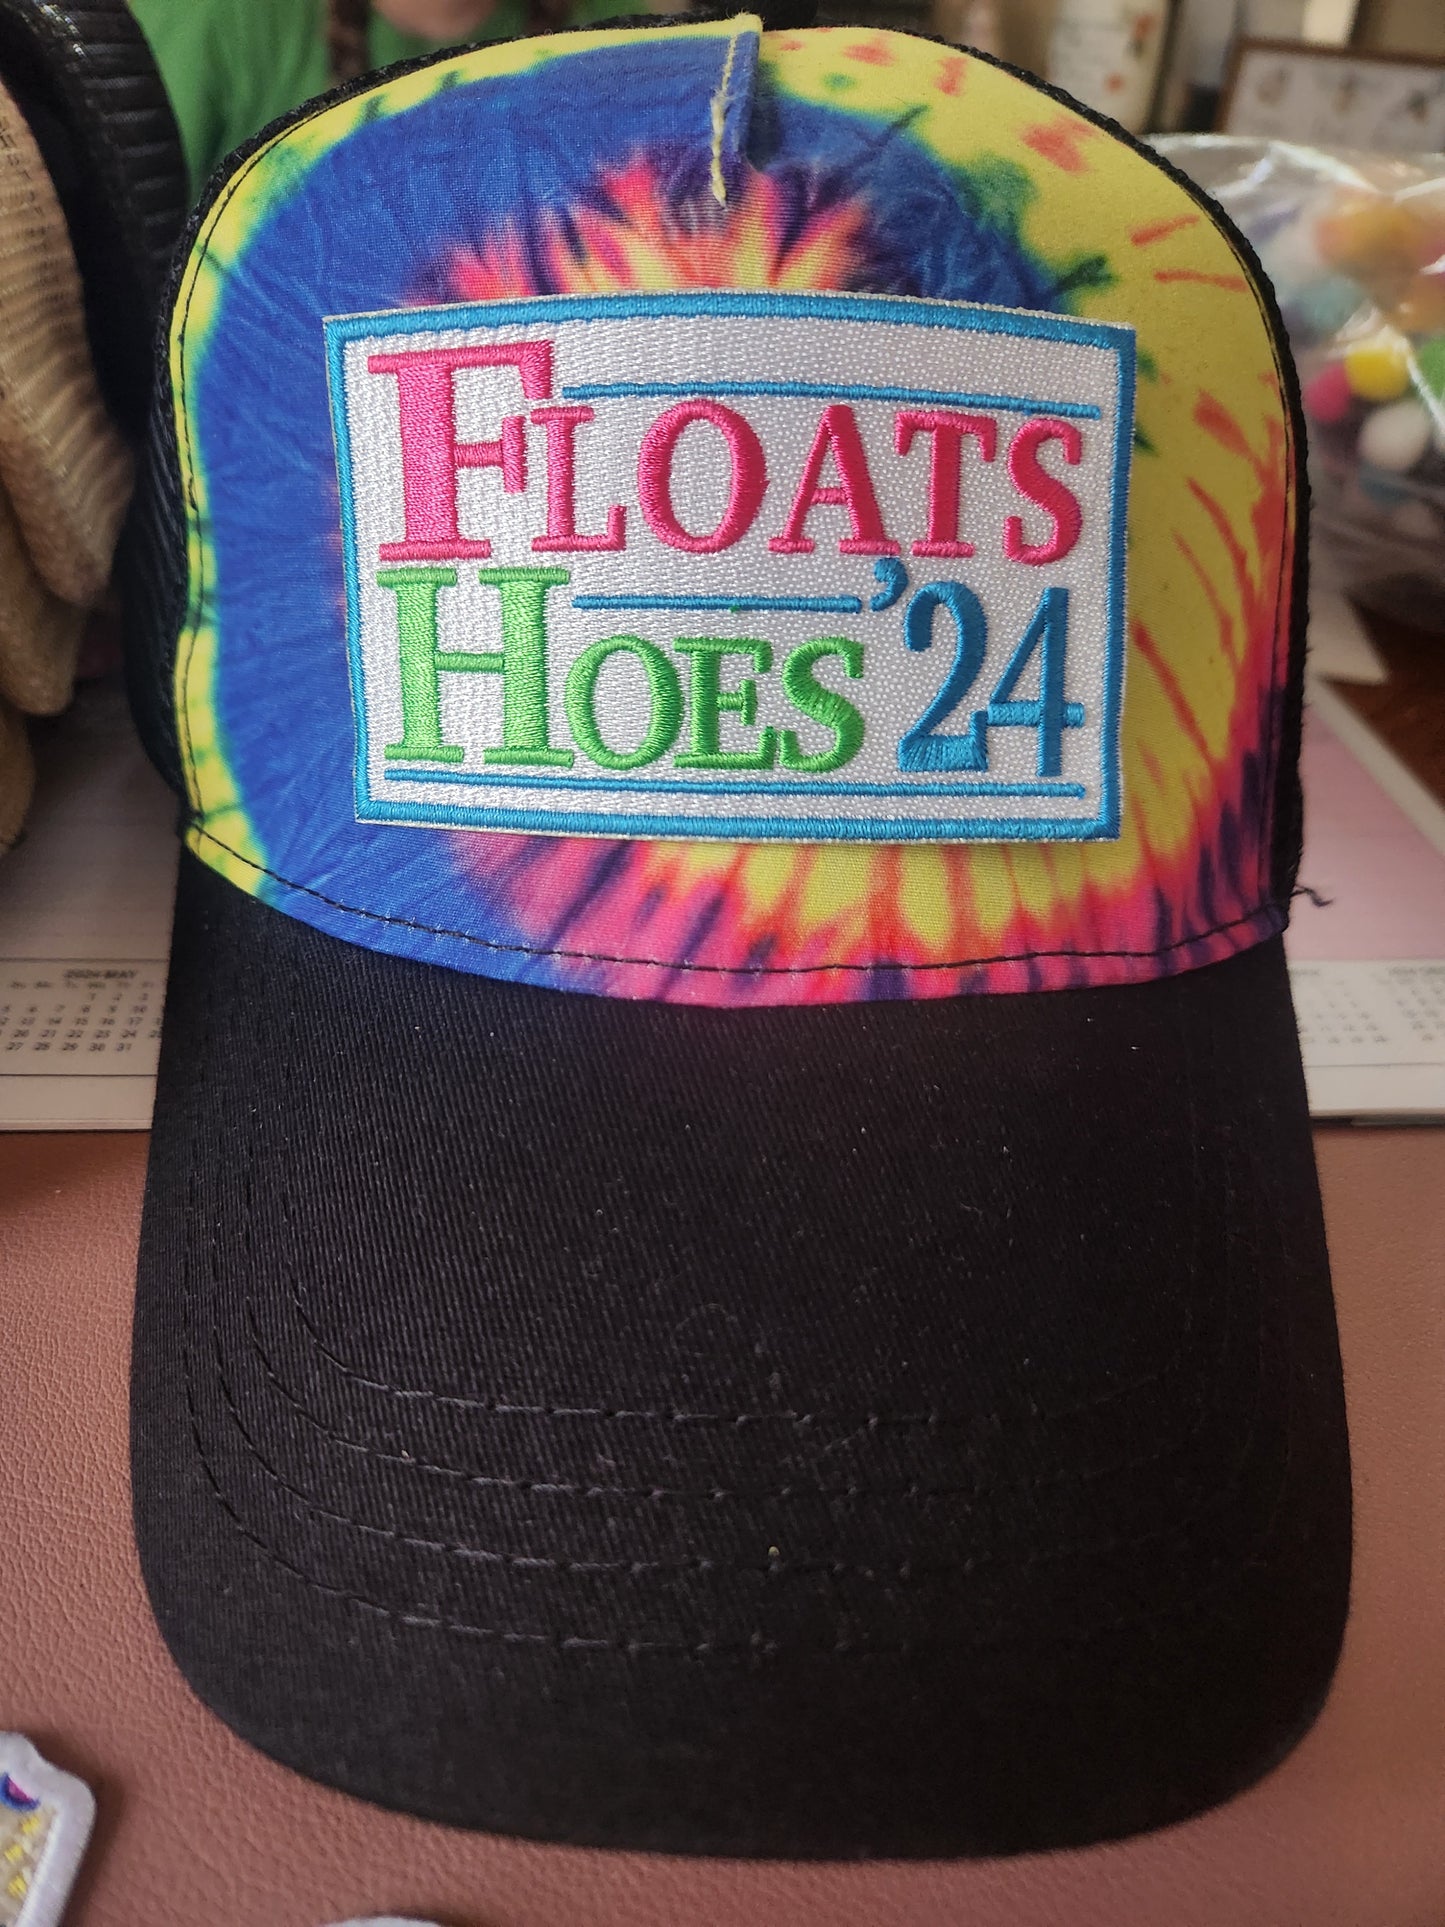 Floats Hoes 24 Iron-On PATCH